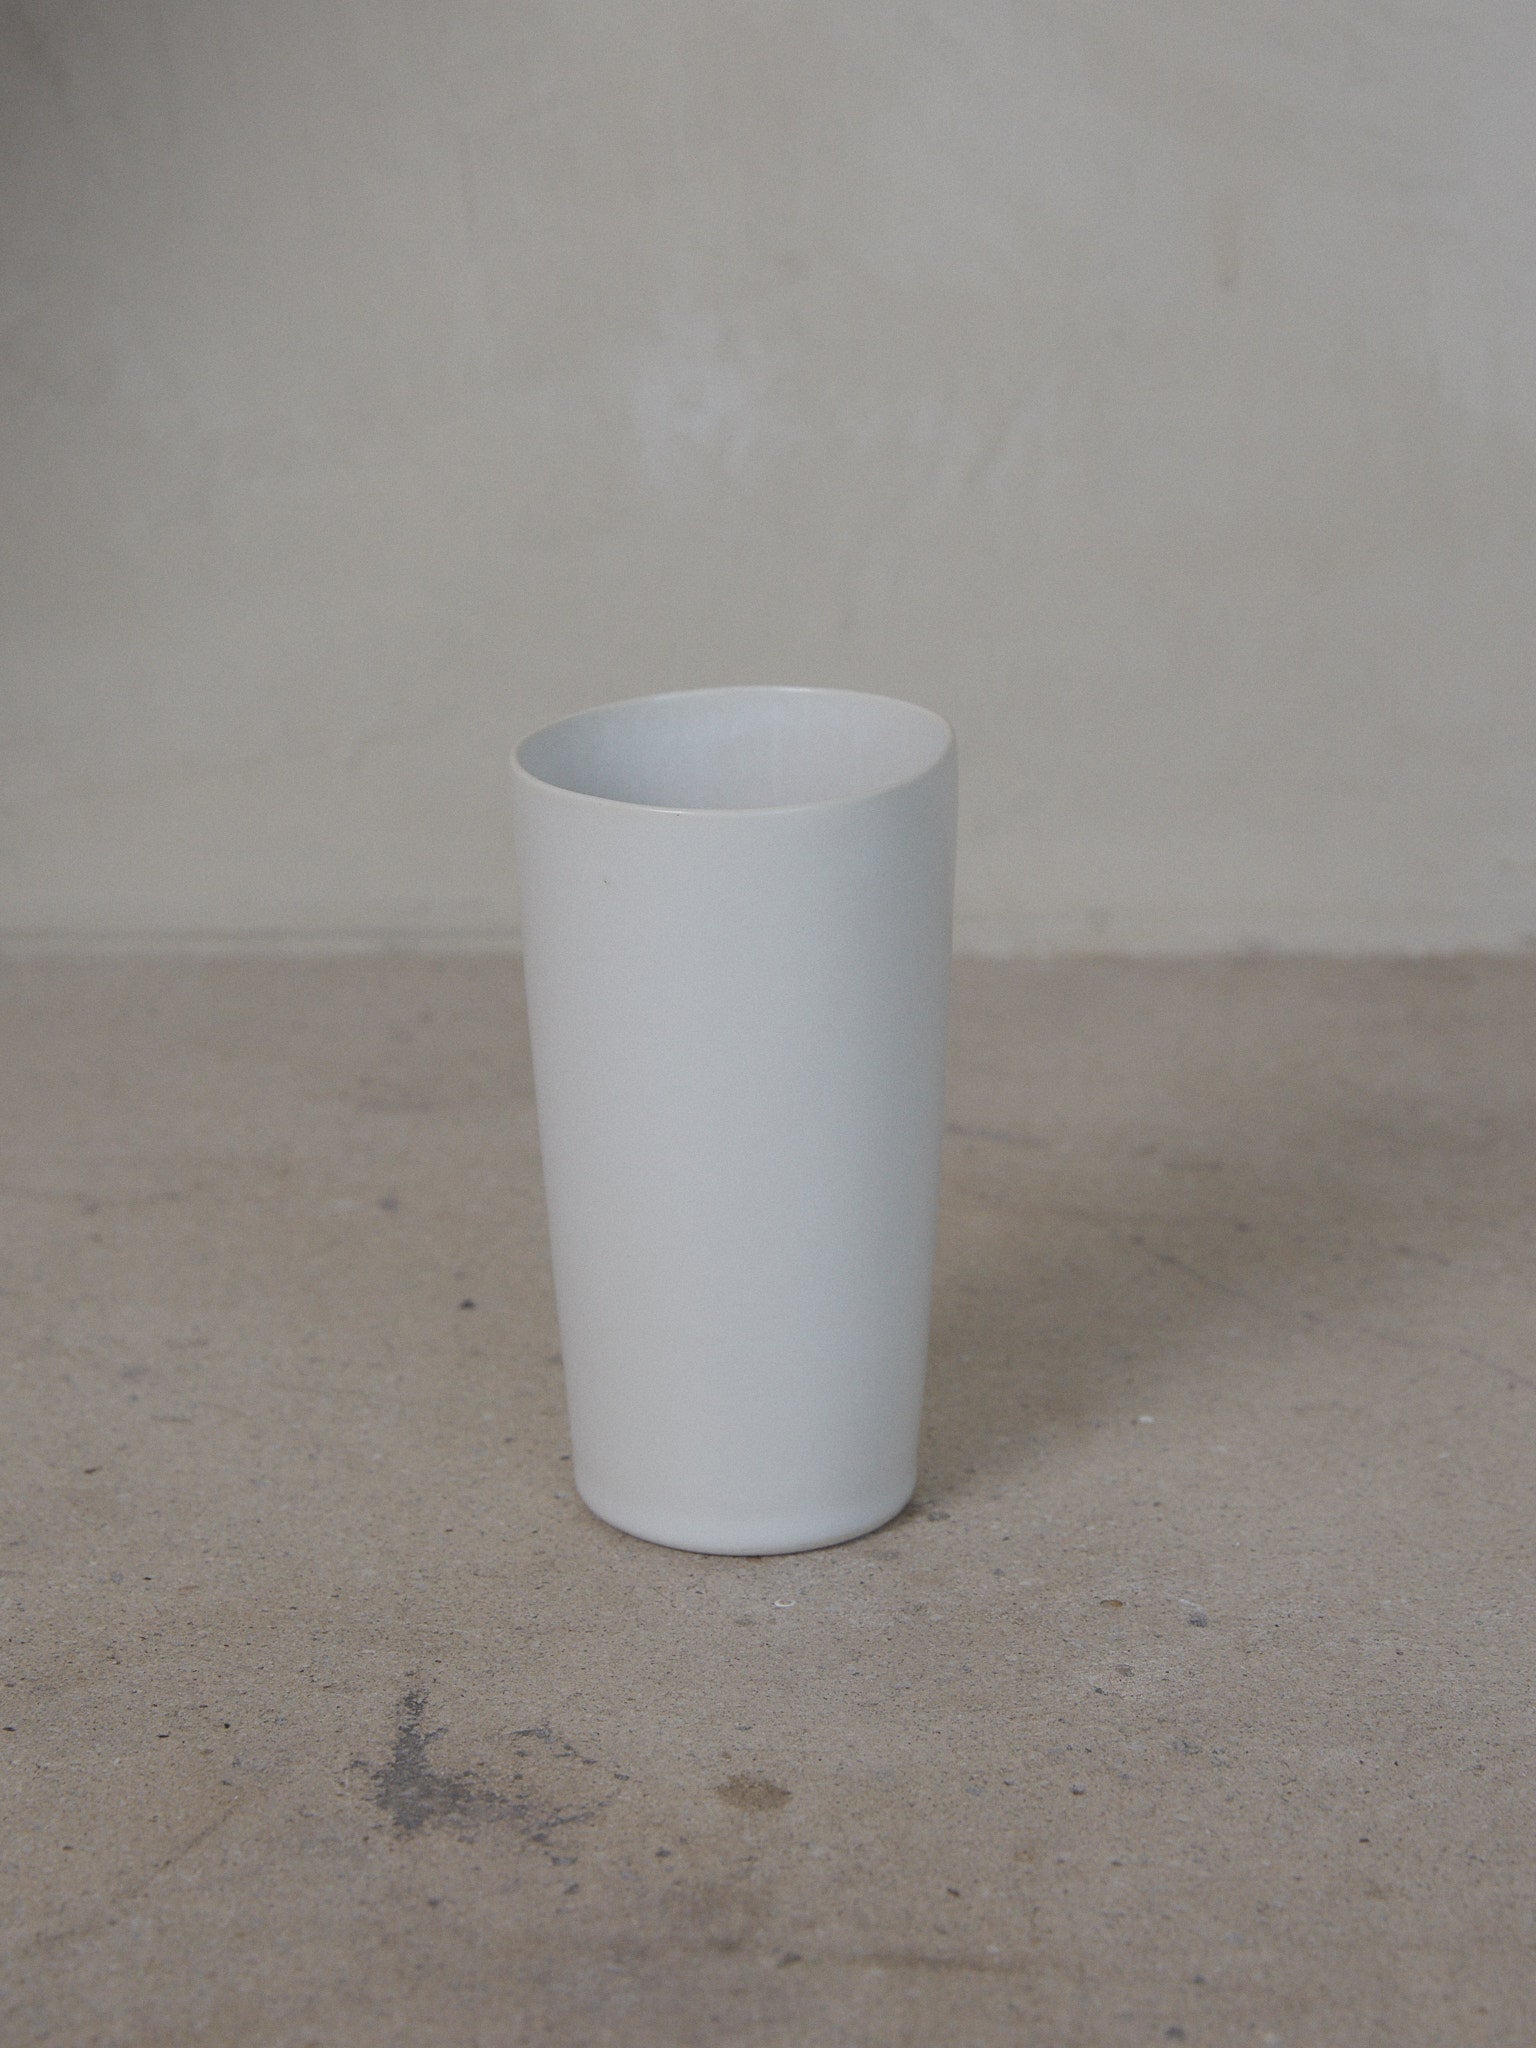 Raw Tumbler. Exclusively ours. Our hand crafted ceramic tumblers are a casual everyday essential for cold or hot beverages in classic matte, milky white stoneware.